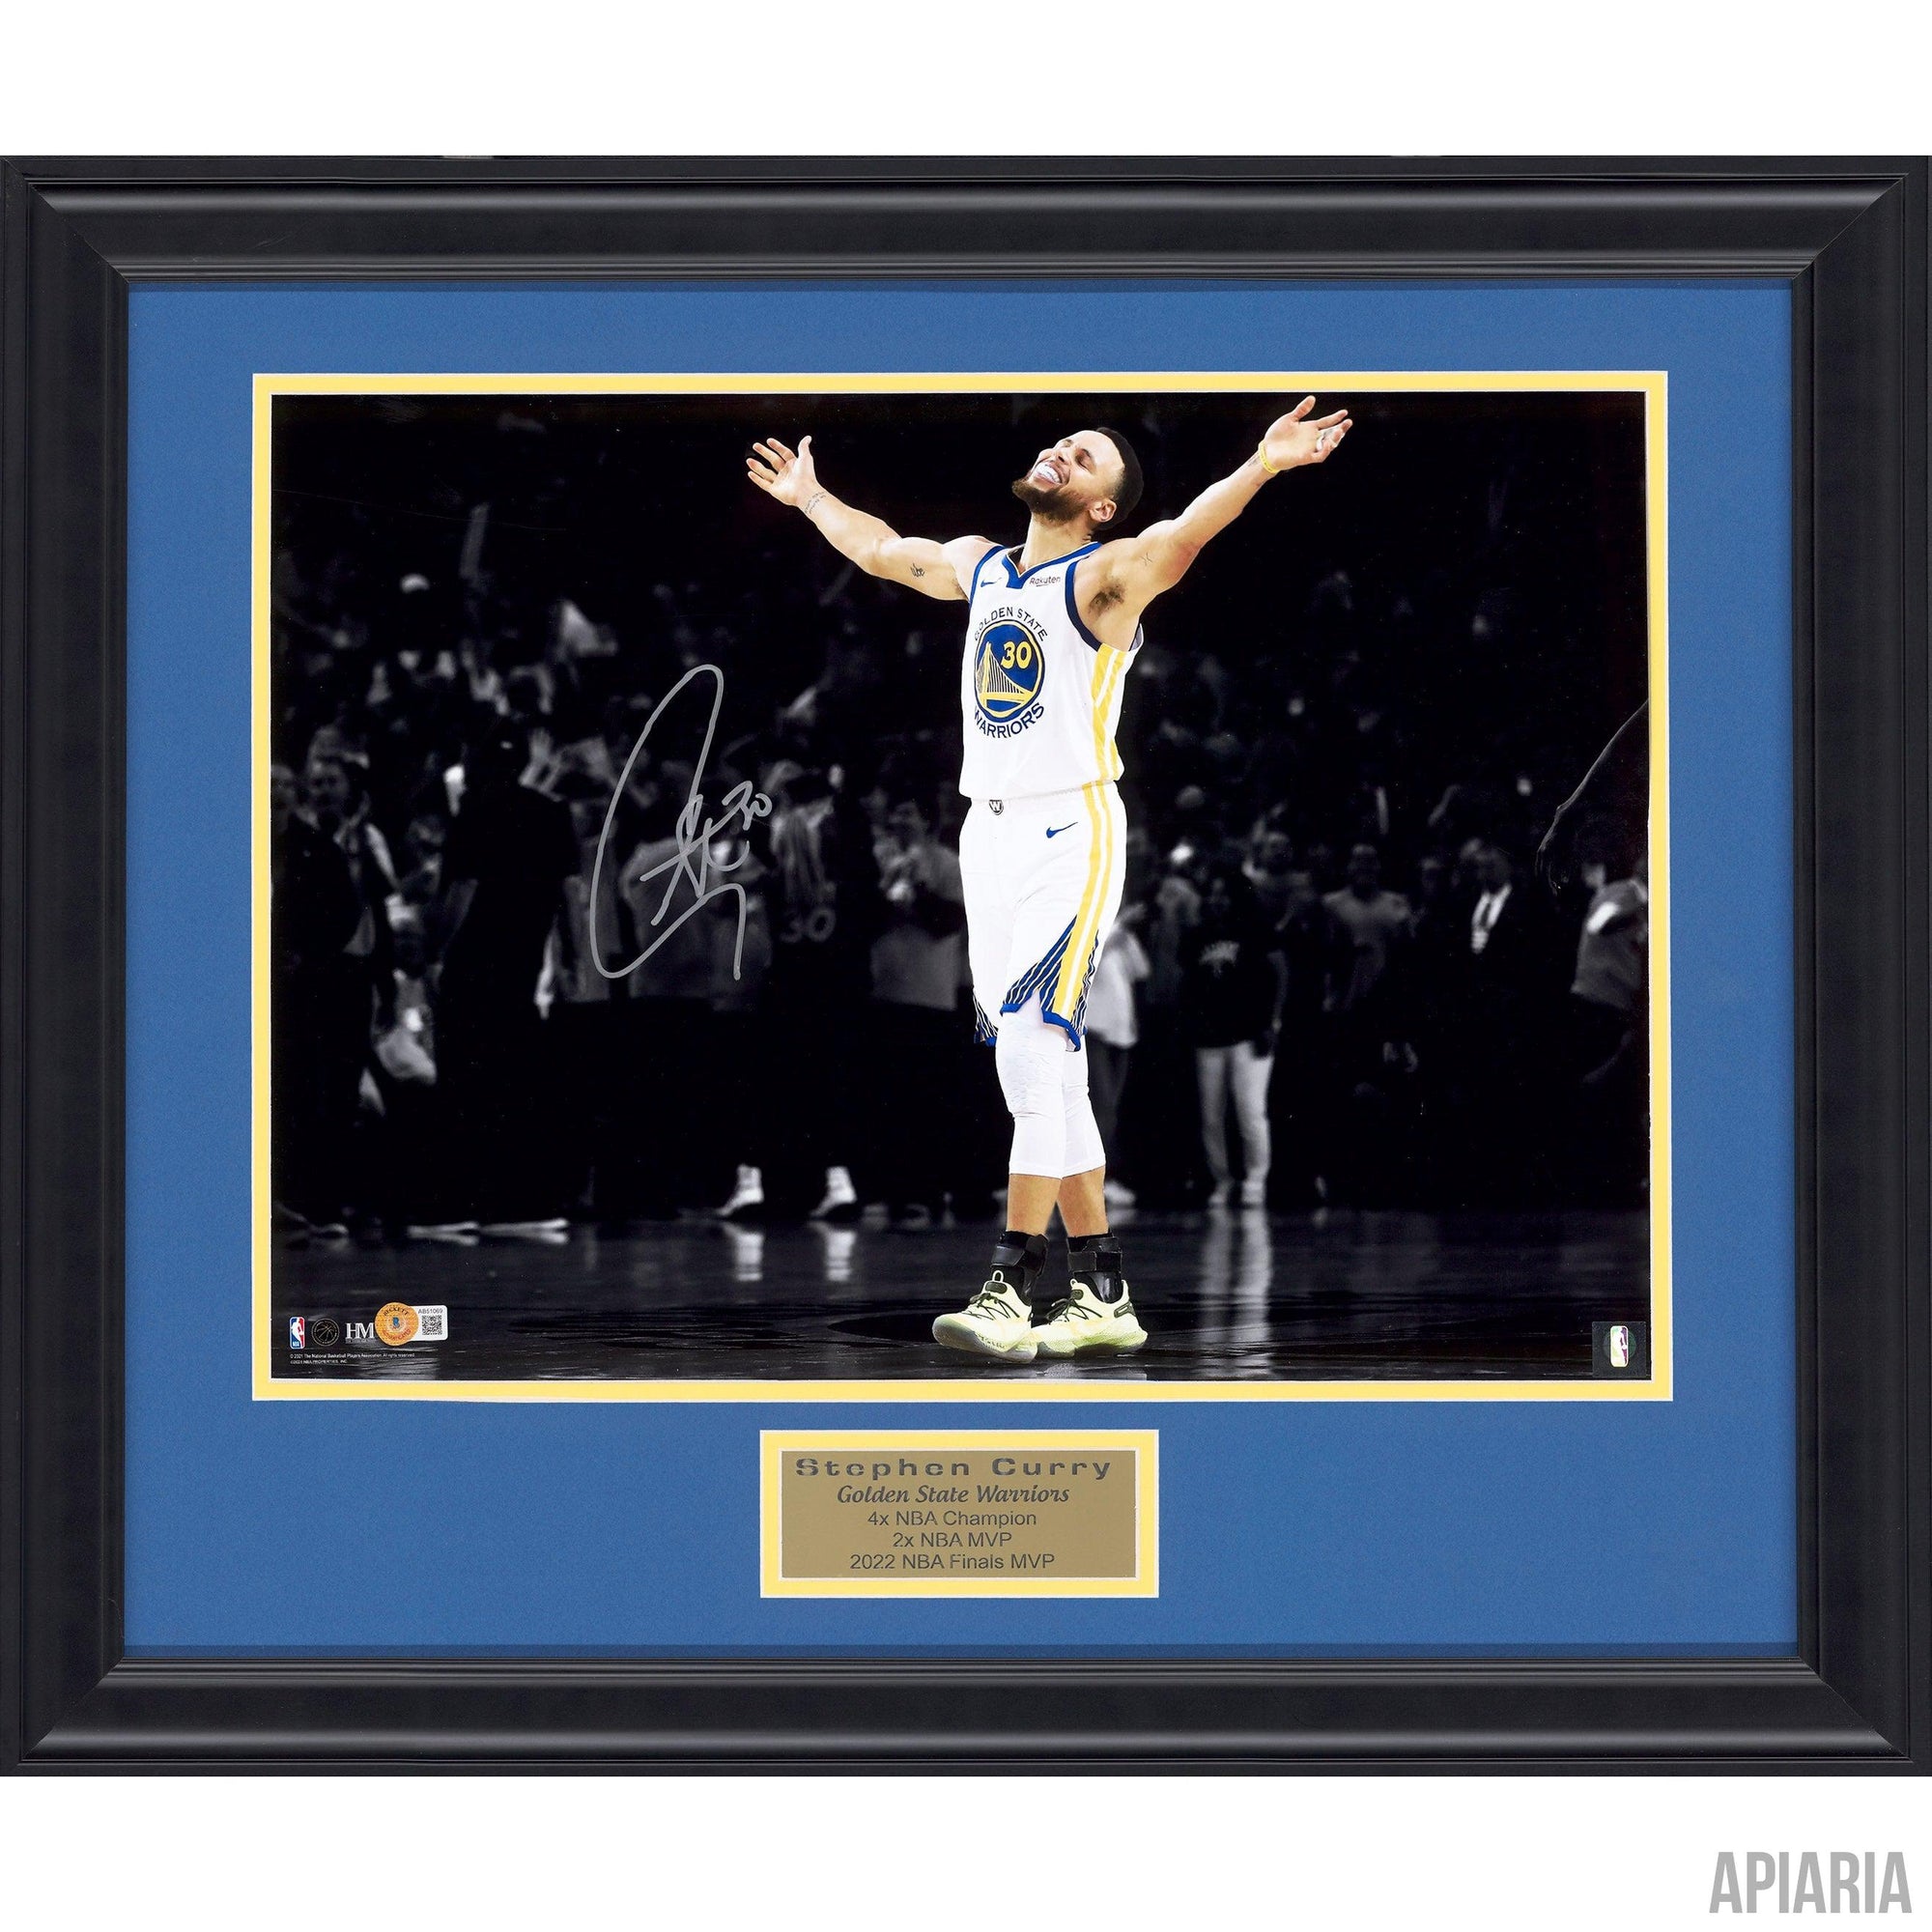 Stephen Curry Autographed Photo-Framed Item-Apiaria